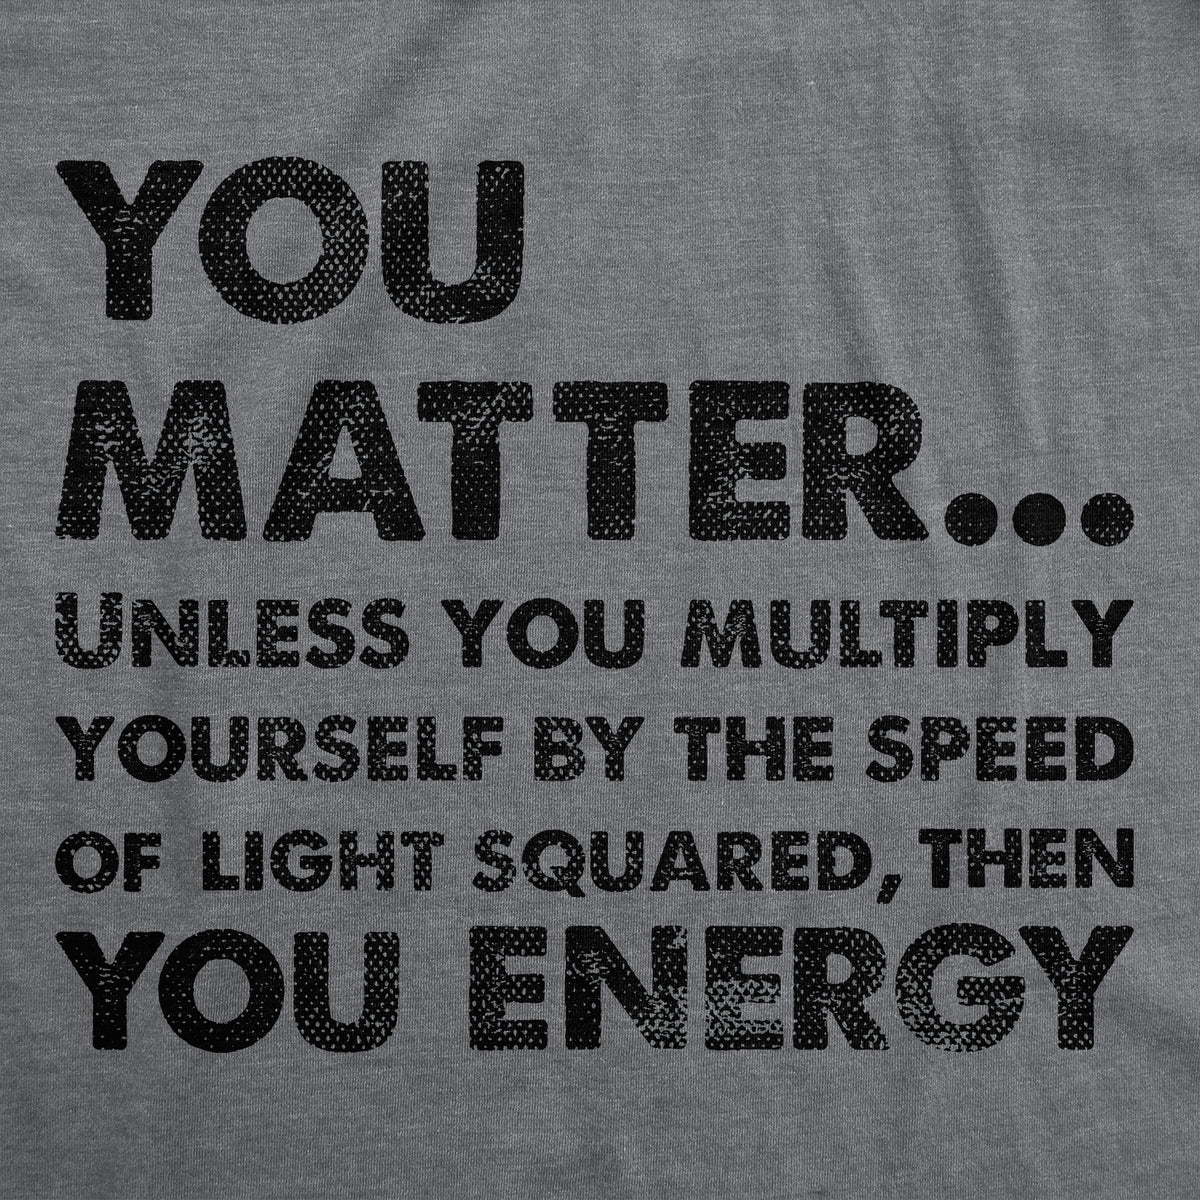 You Matter Unless You Multiply Yourself By The Speed Of Light Squared Then You Energy Men&#39;s T Shirt